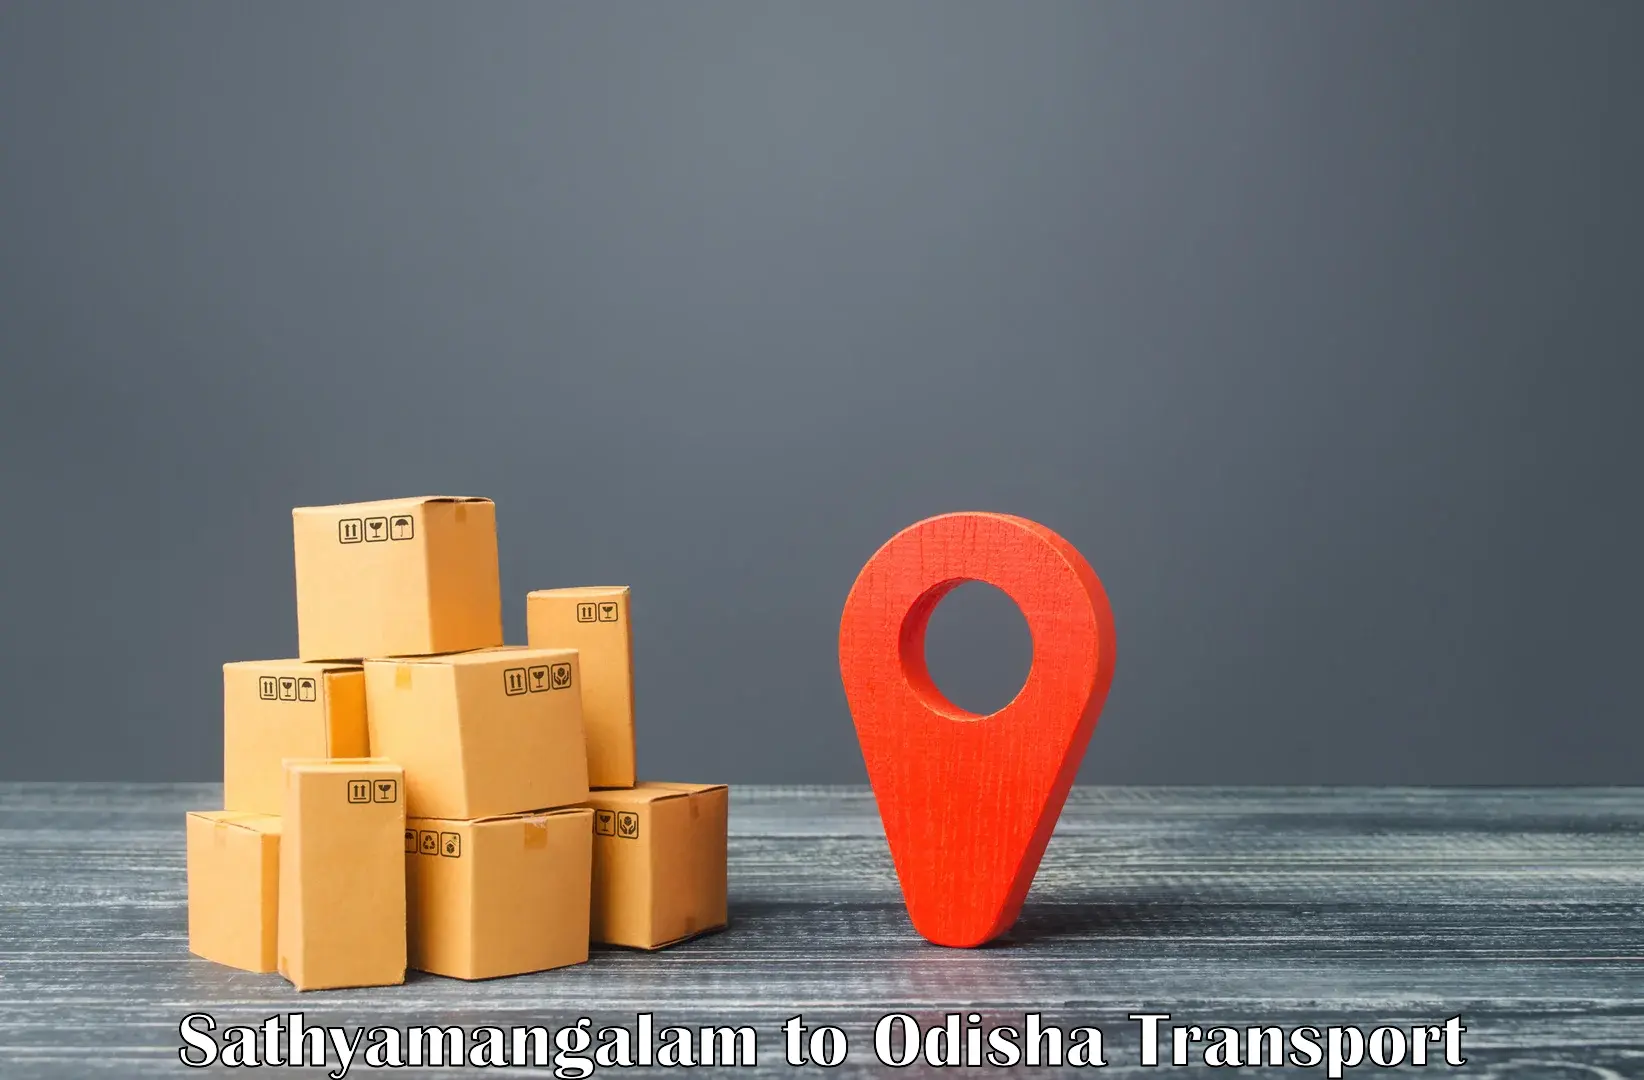 Parcel transport services in Sathyamangalam to Daspalla